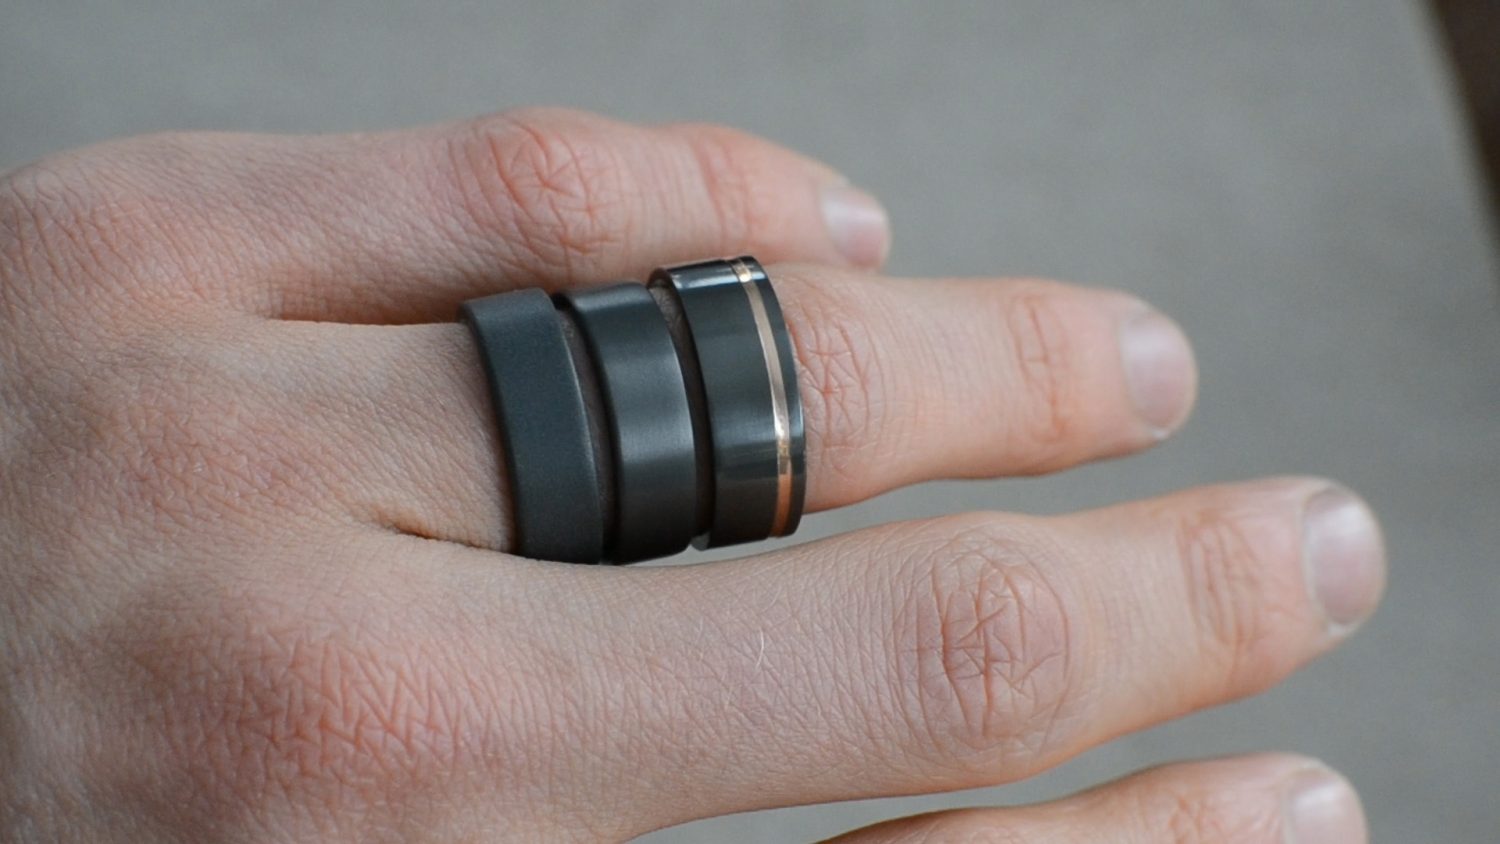 Various types of ring finishes for men's rings. The image features three black zirconium rings, each finished differently.